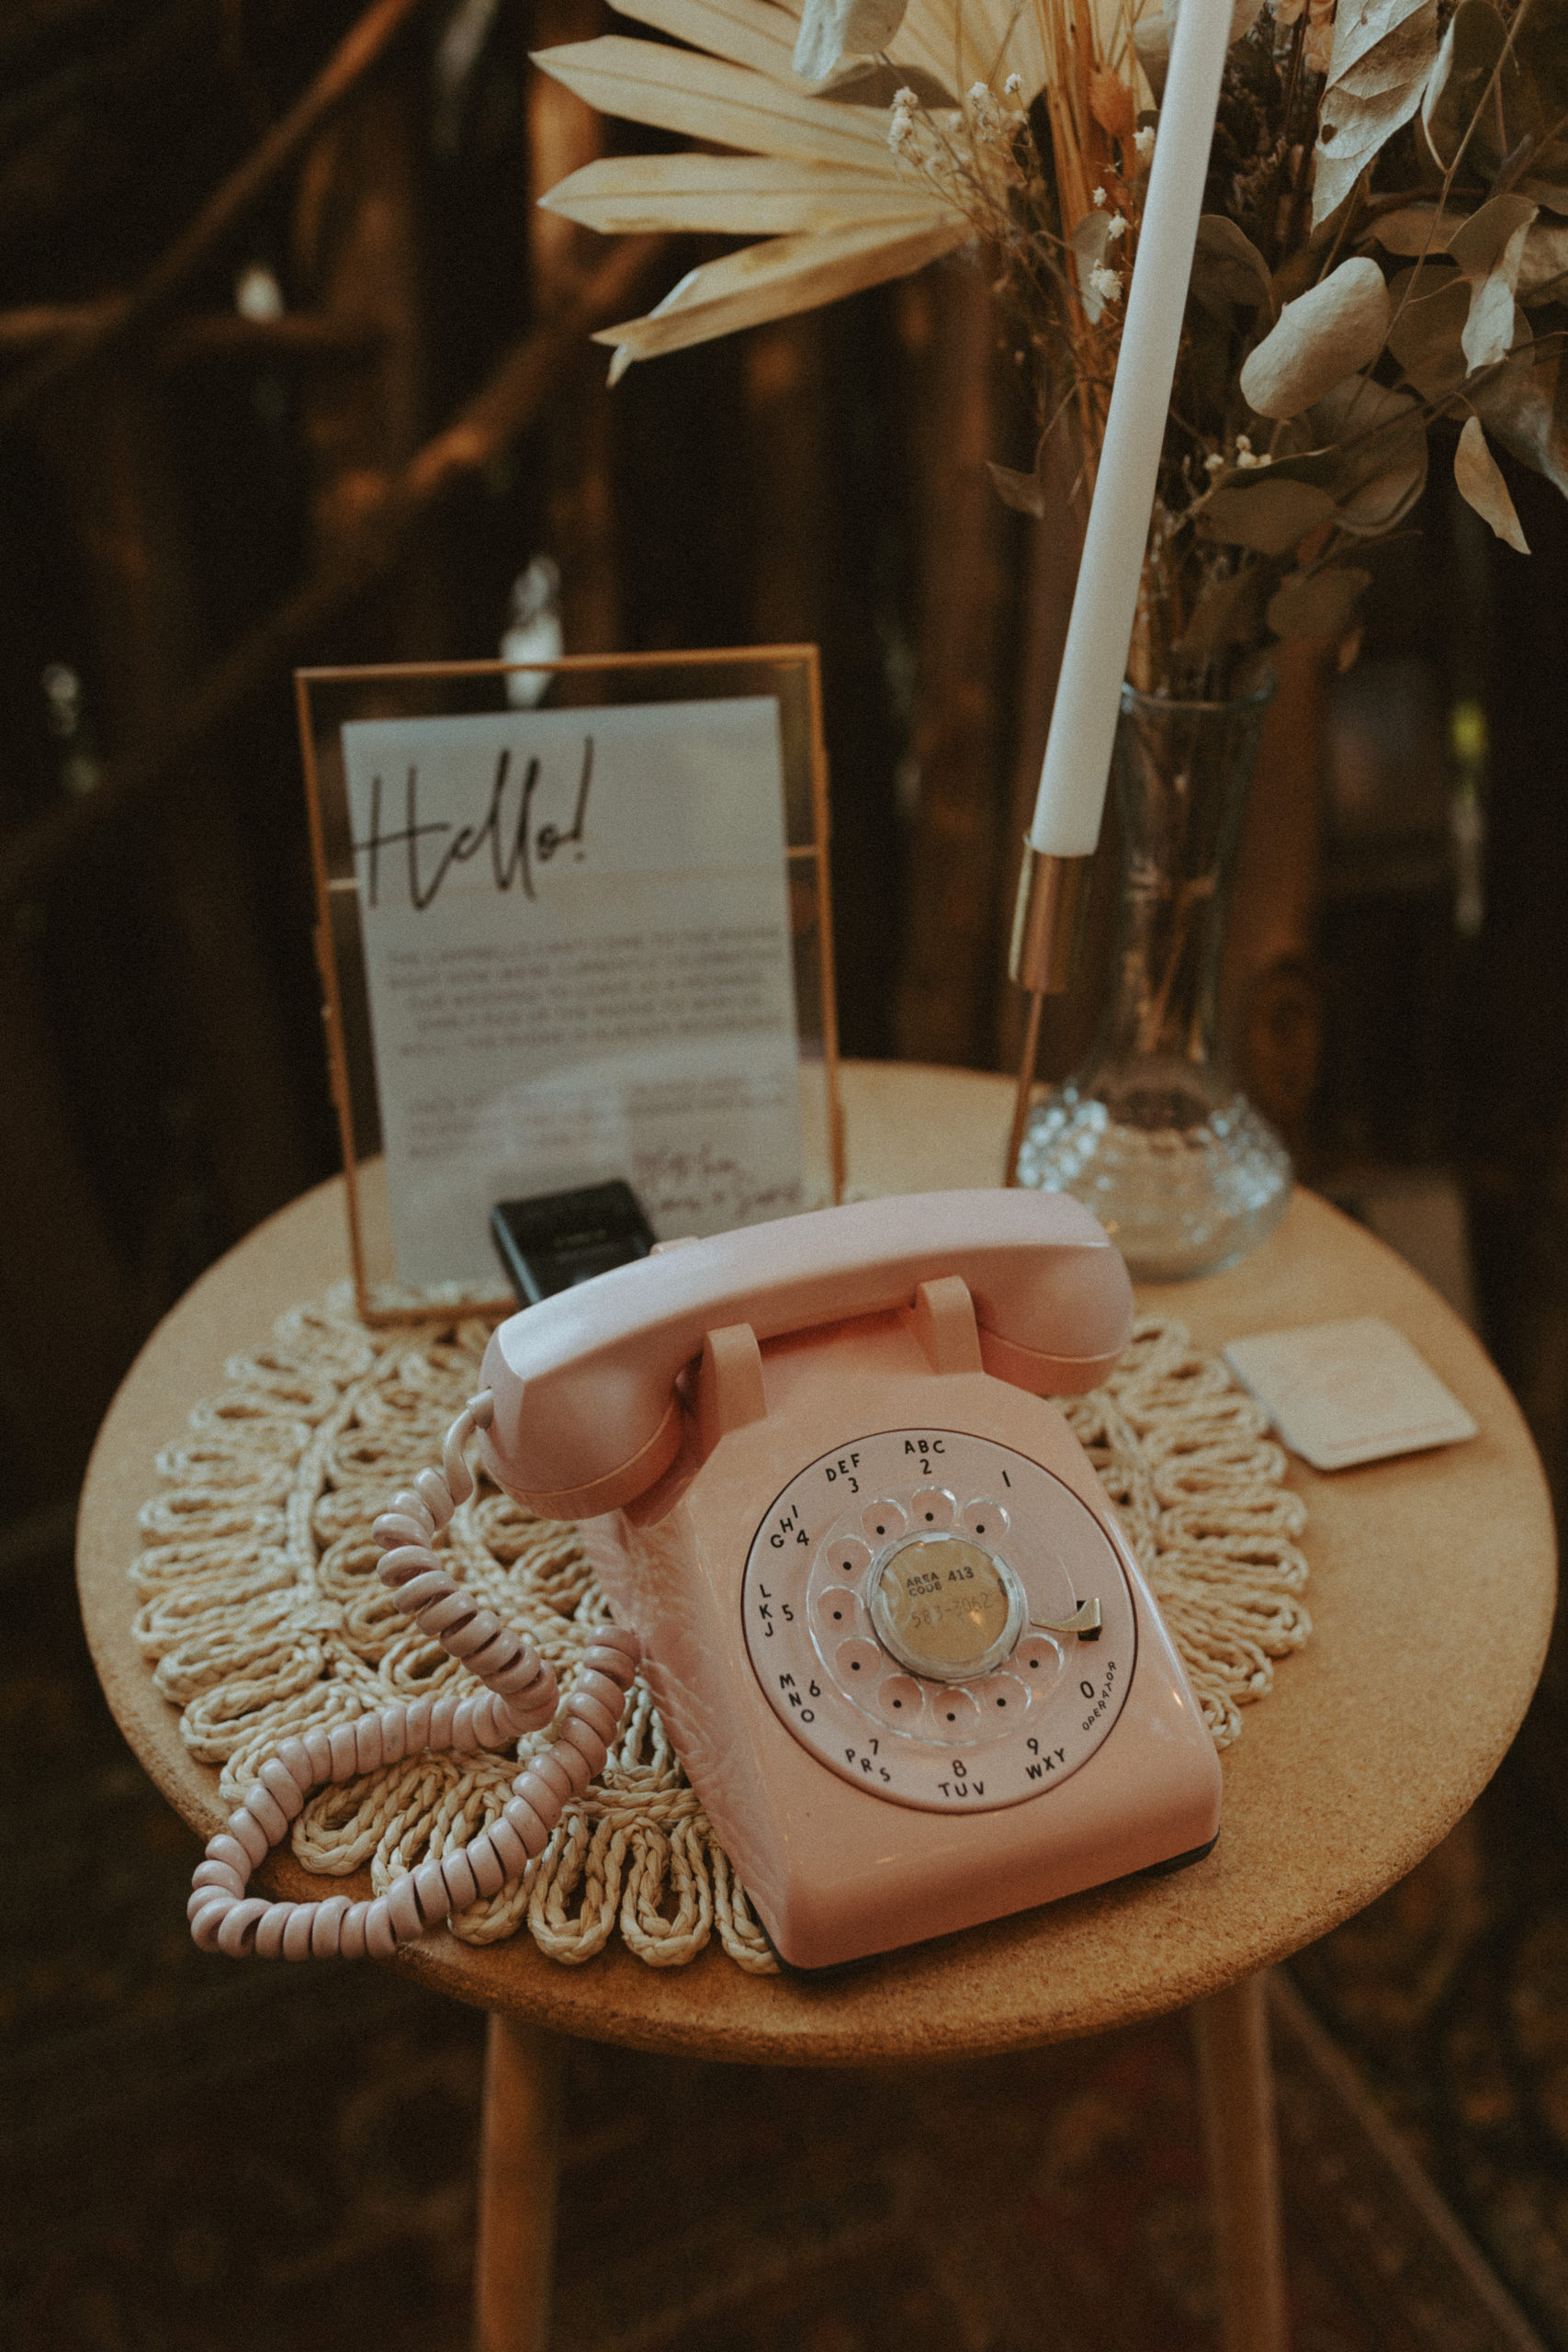 the telephone to leave messages at the reception